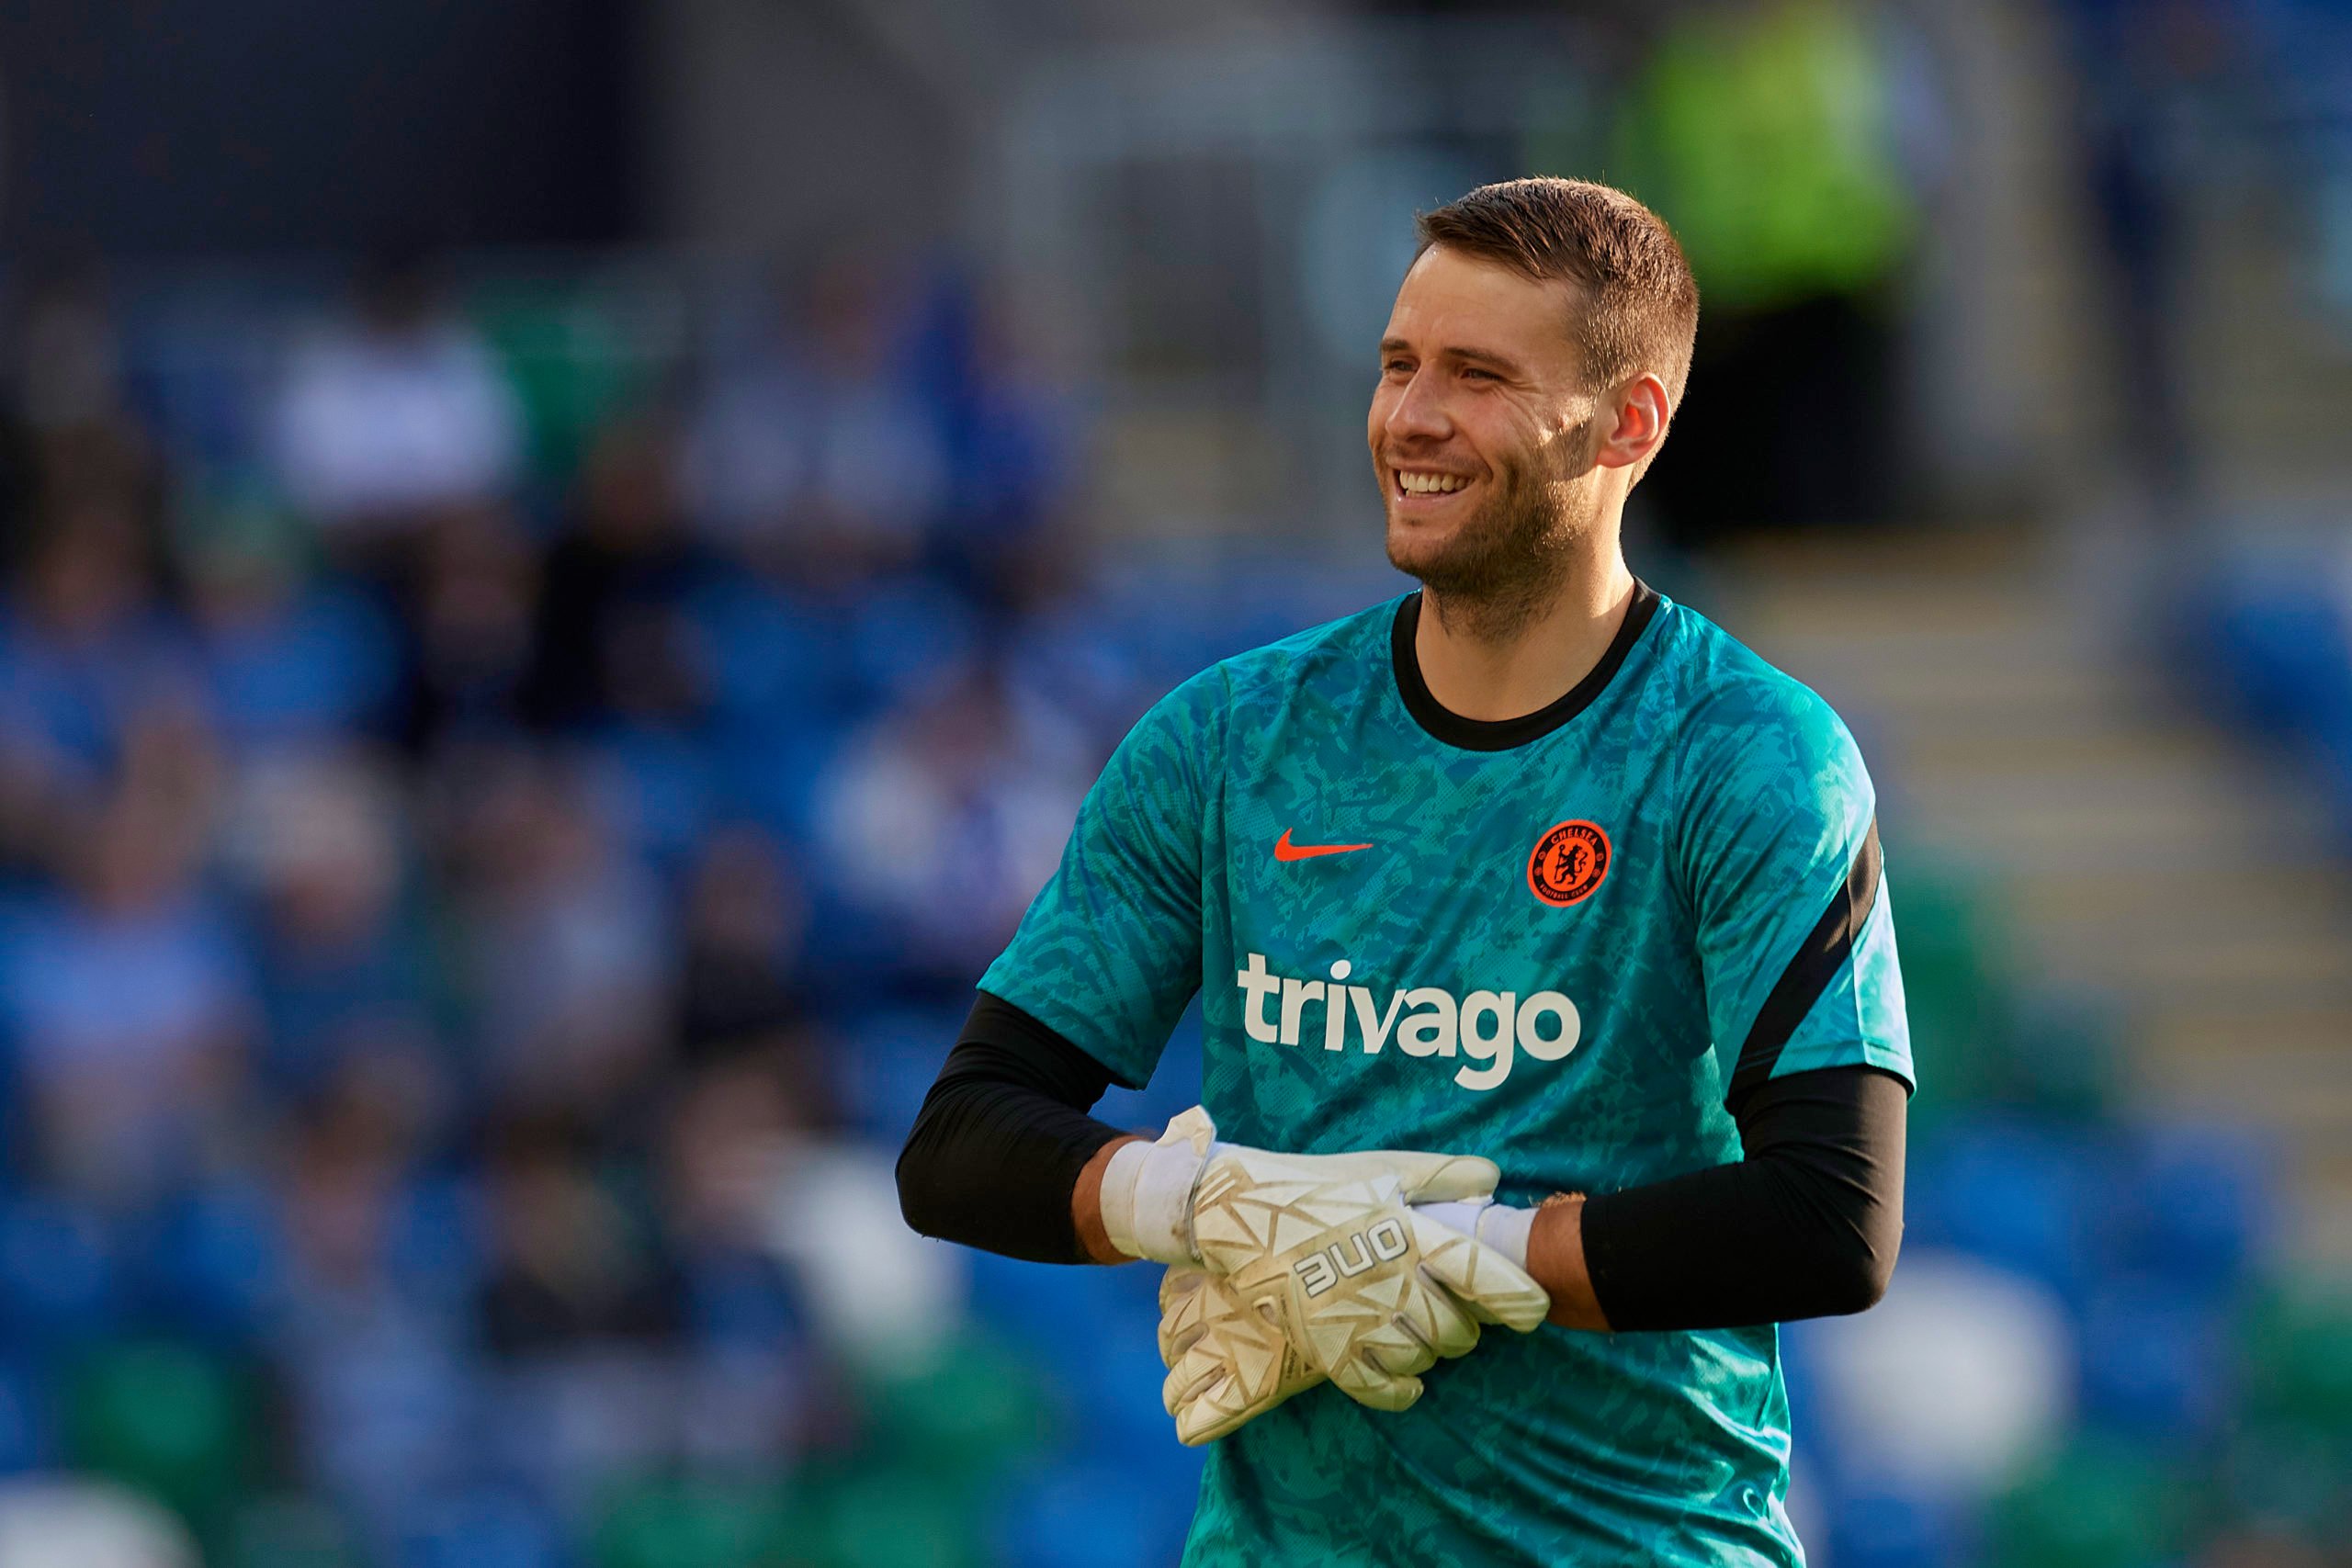 'People forget that': Marcus Bettinelli says everyone overlooks how young Chelsea player actually is